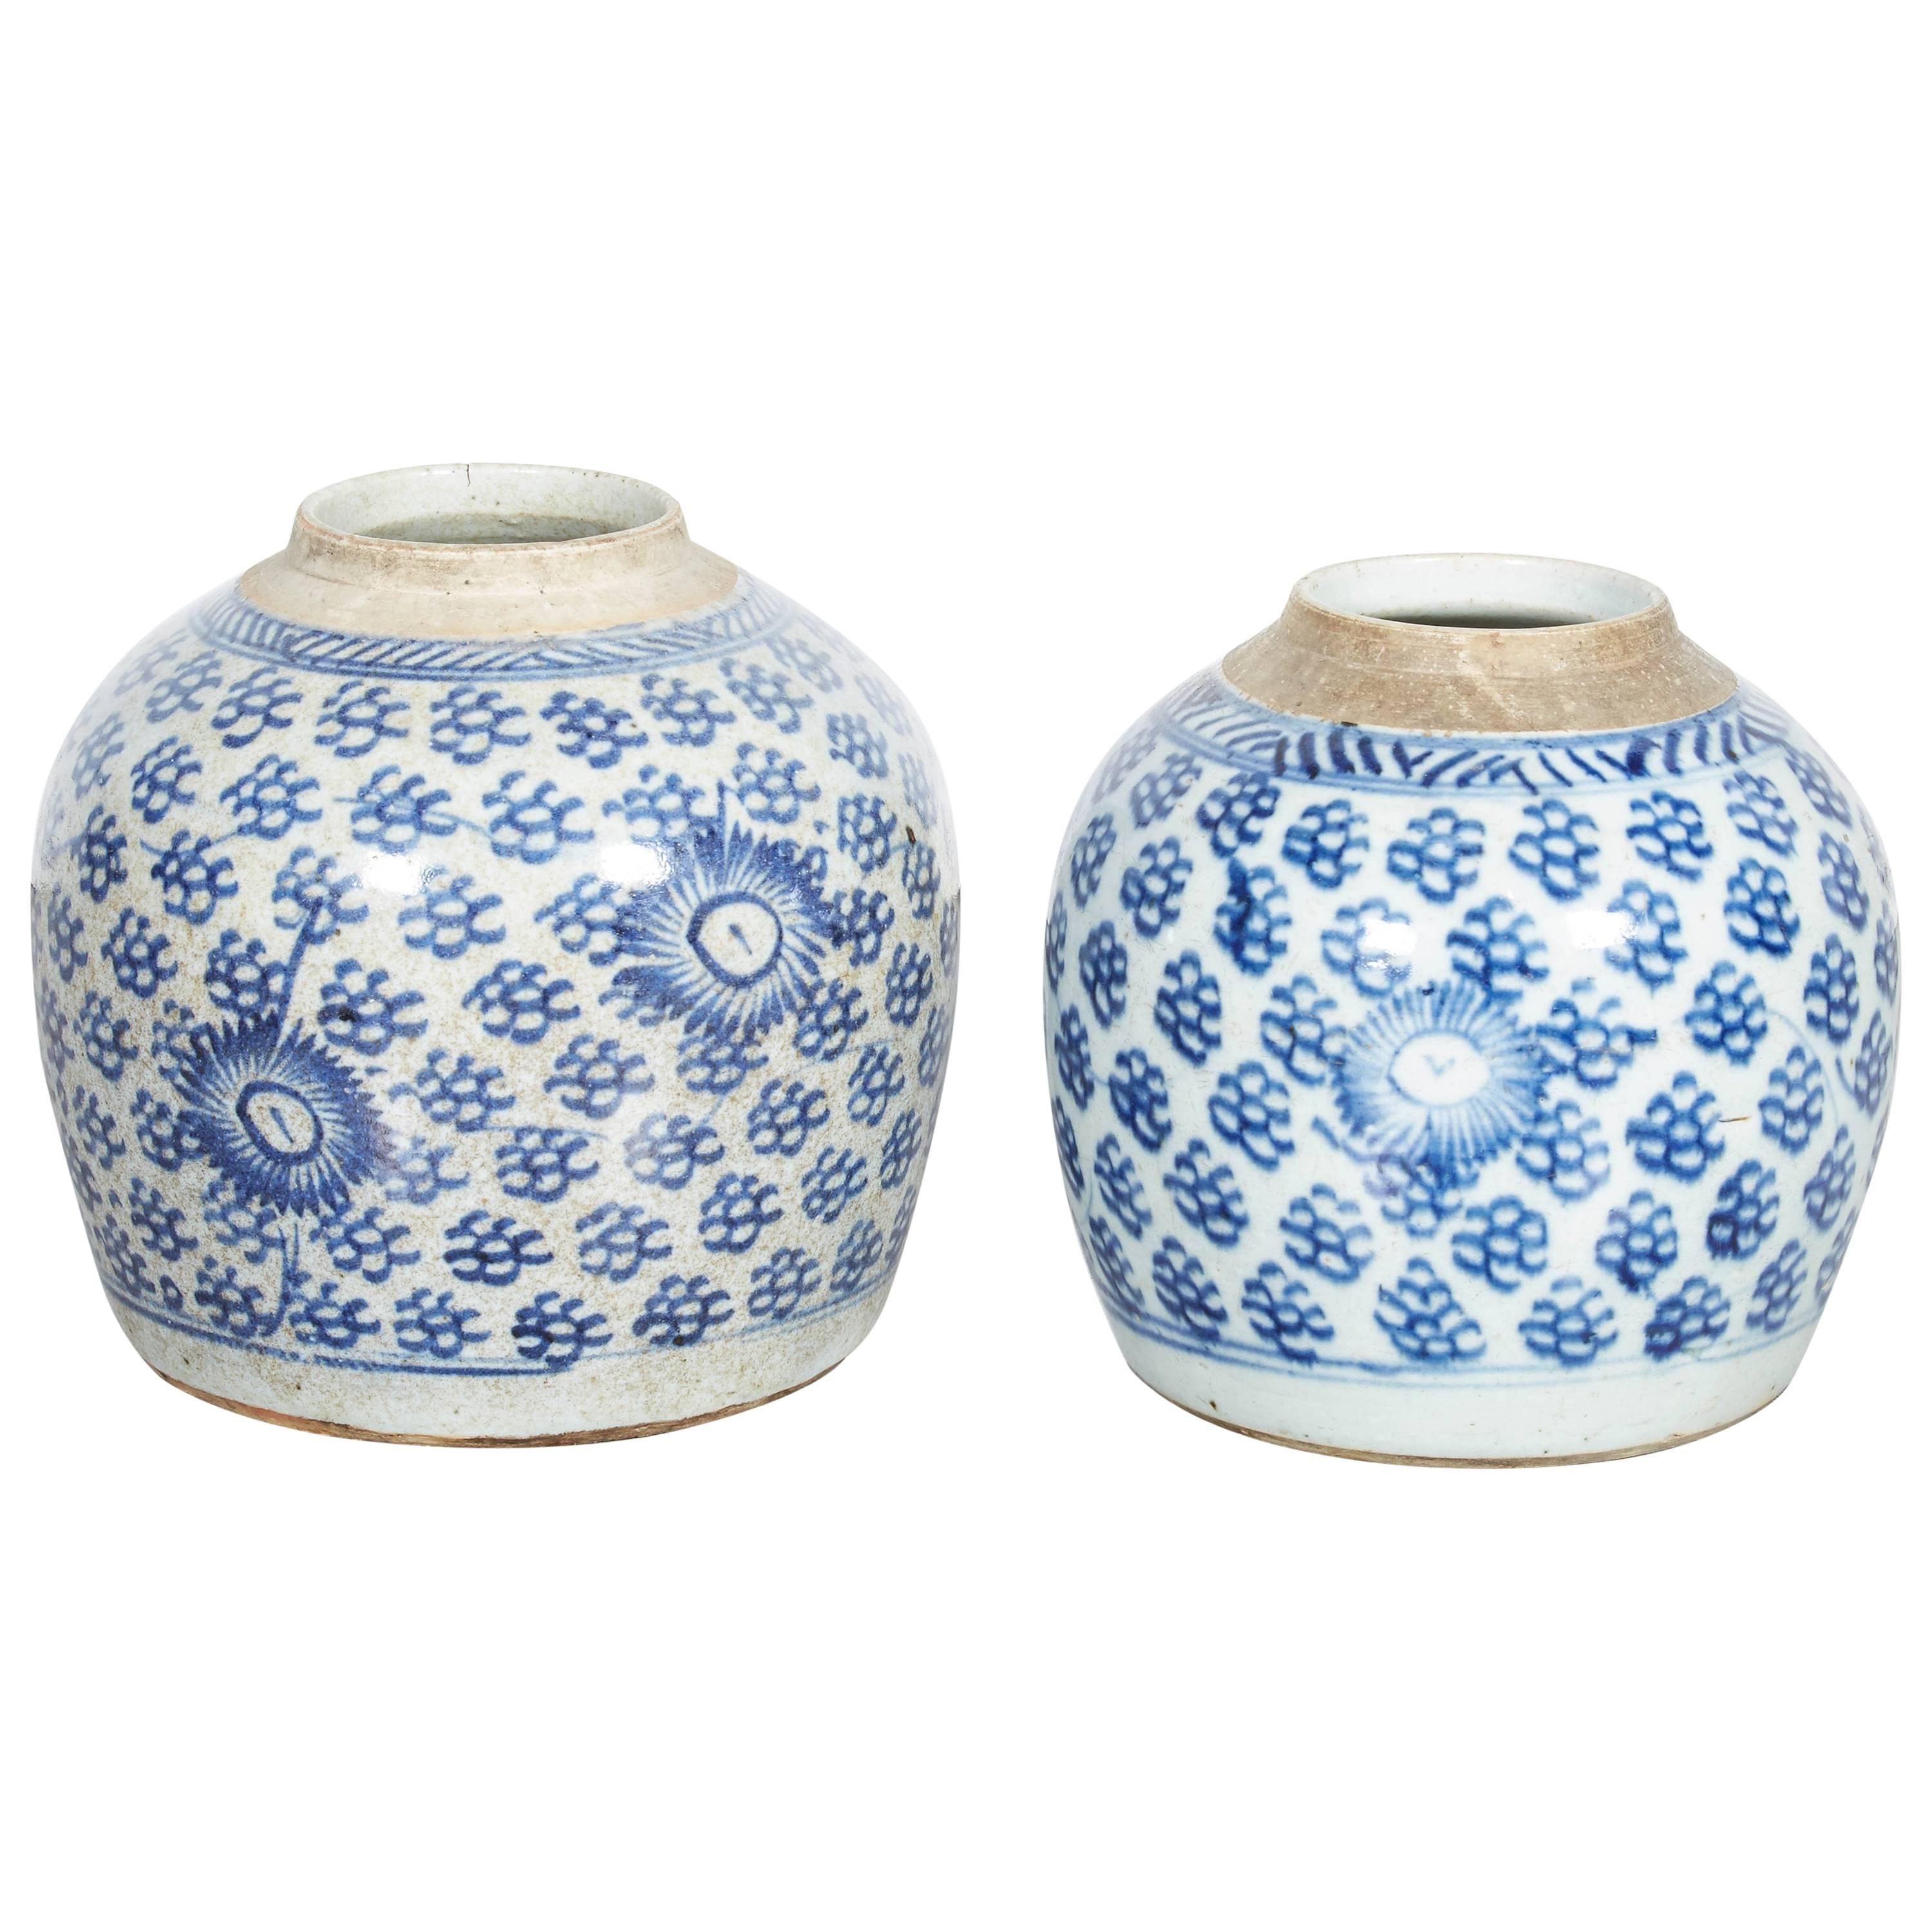 Antique Chinese Blue and White Porcelain Ginger Jars